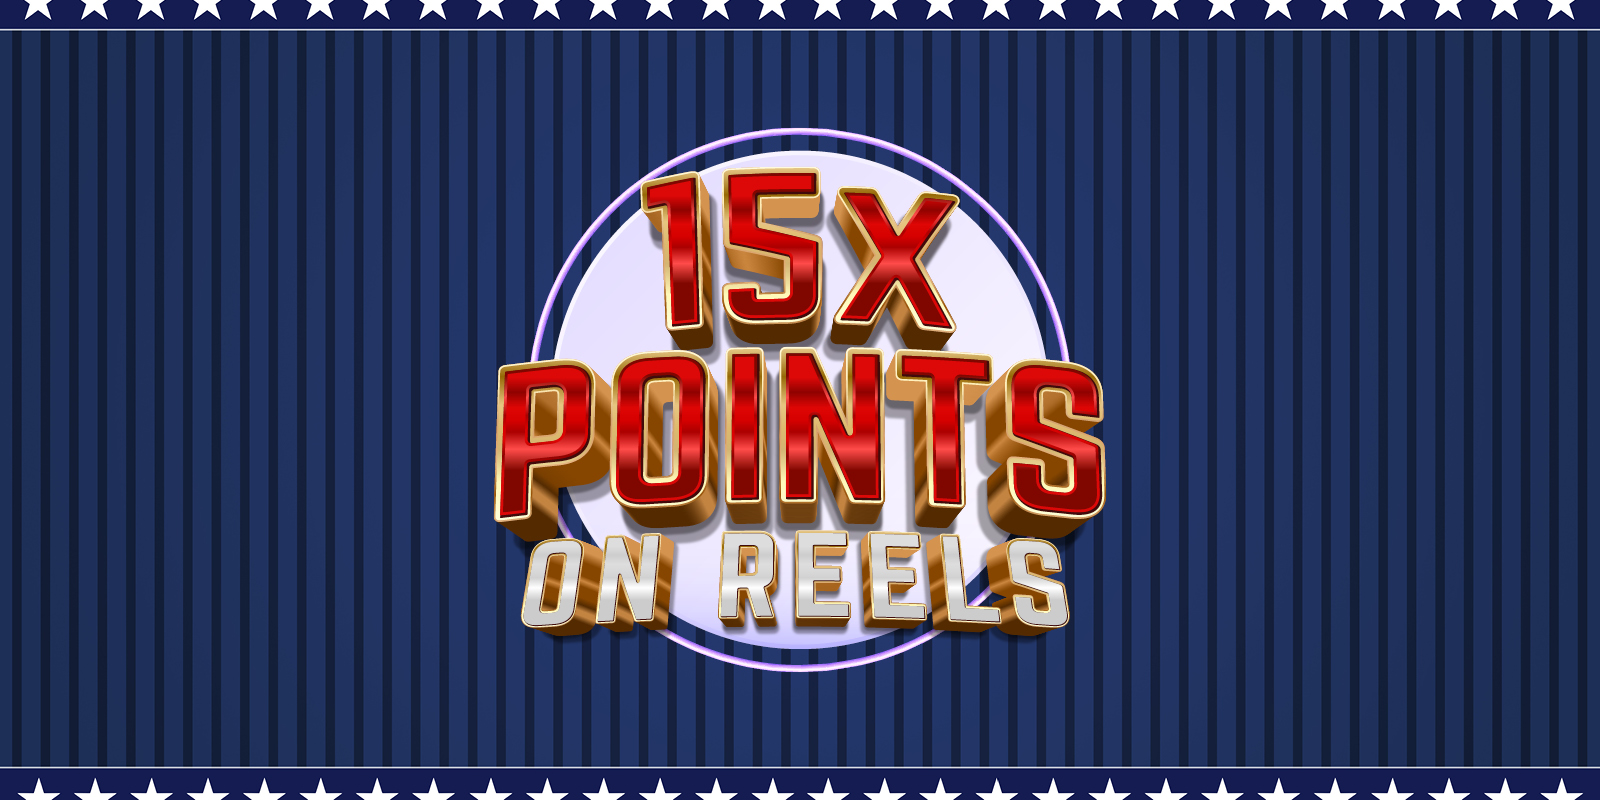 15X Points on Reels creative with a 4th of July patriotic esthetic